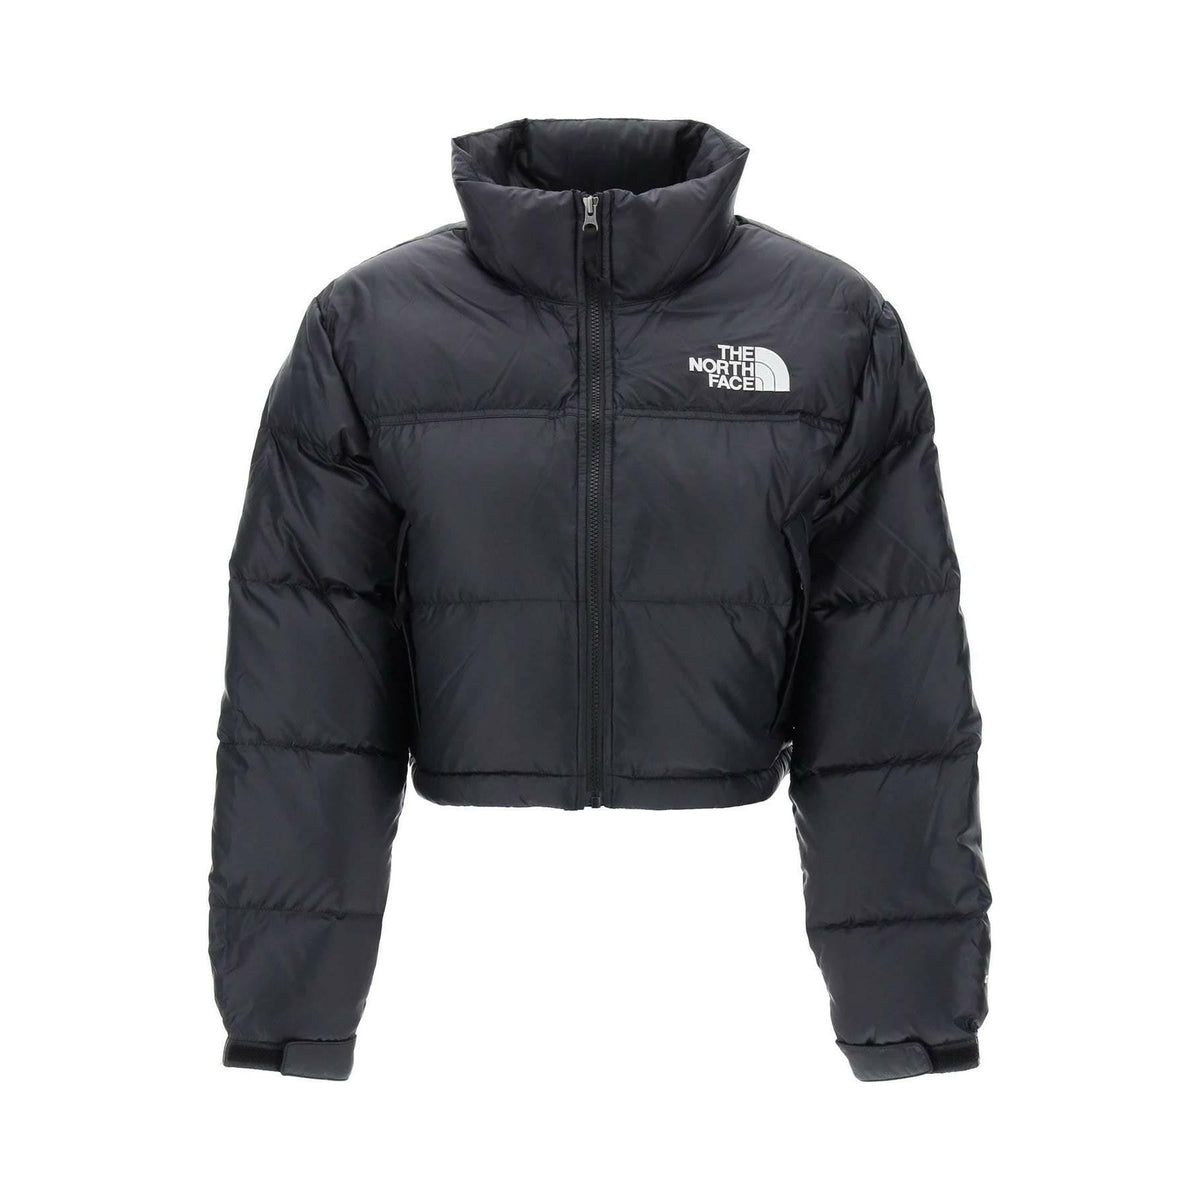 THE NORTH FACE - The North Face Black Cropped Nuptse Jacket with Recycled Down - JOHN JULIA